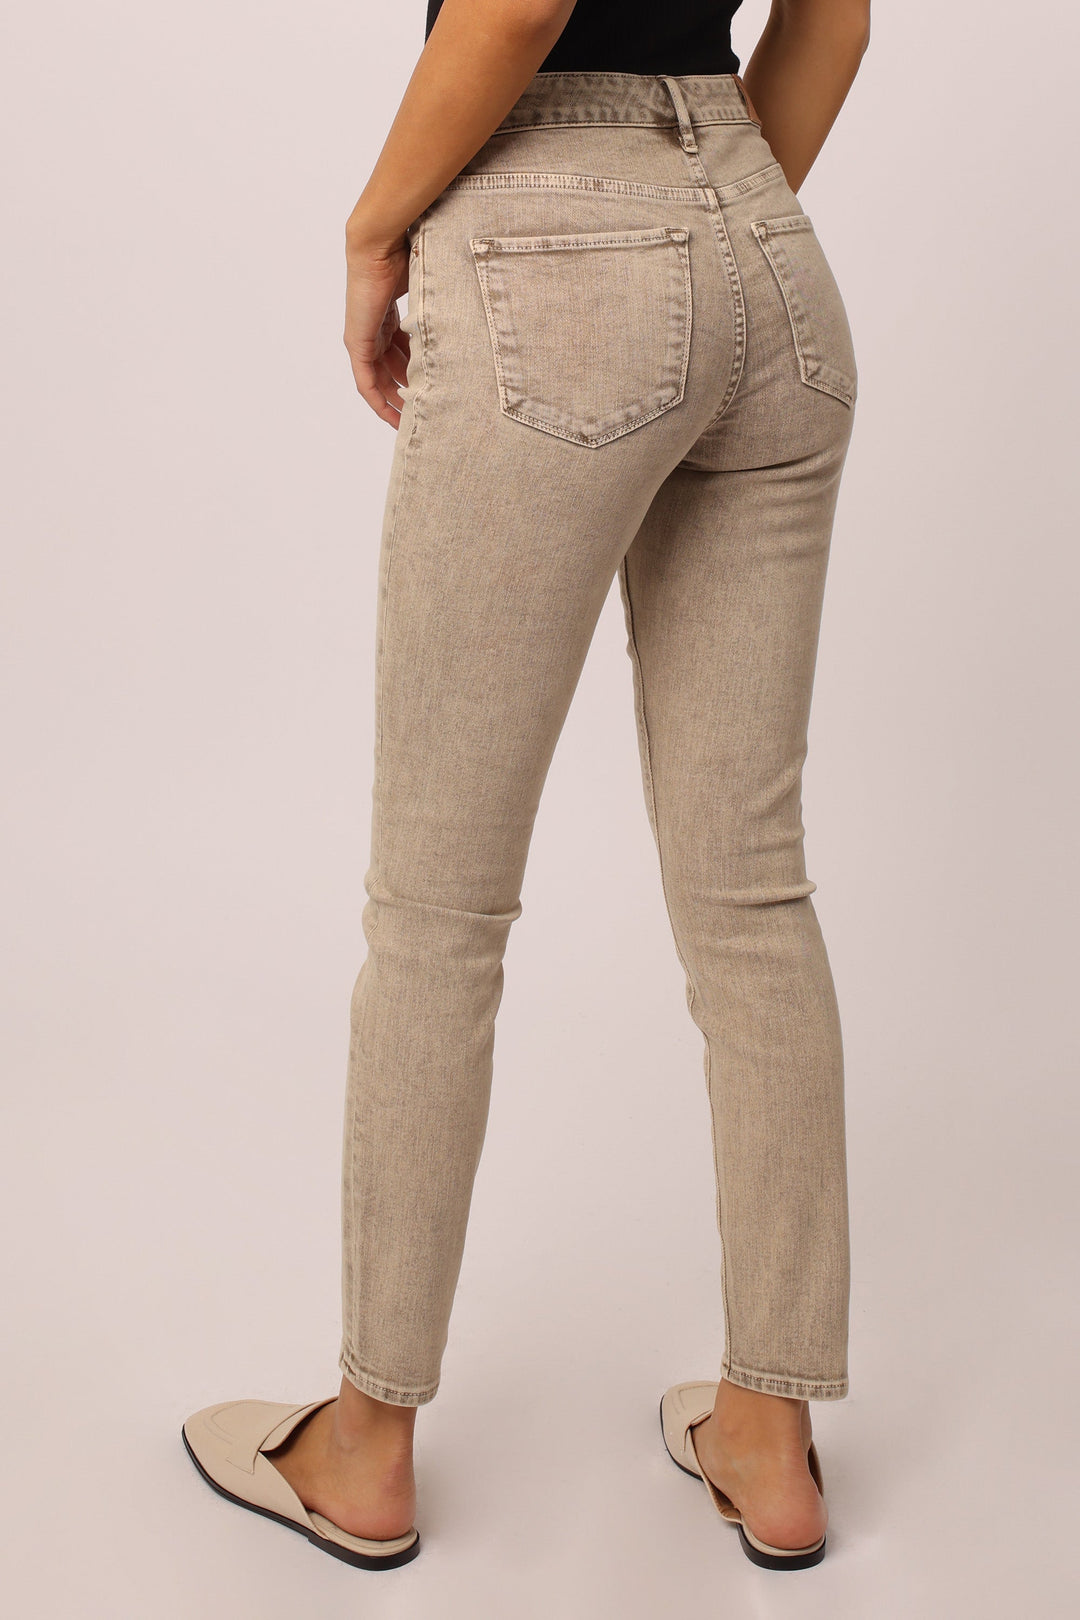 image of a female model wearing a GISELE HIGH RISE ANKLE SKINNY JEANS BISCOTTI JEANS